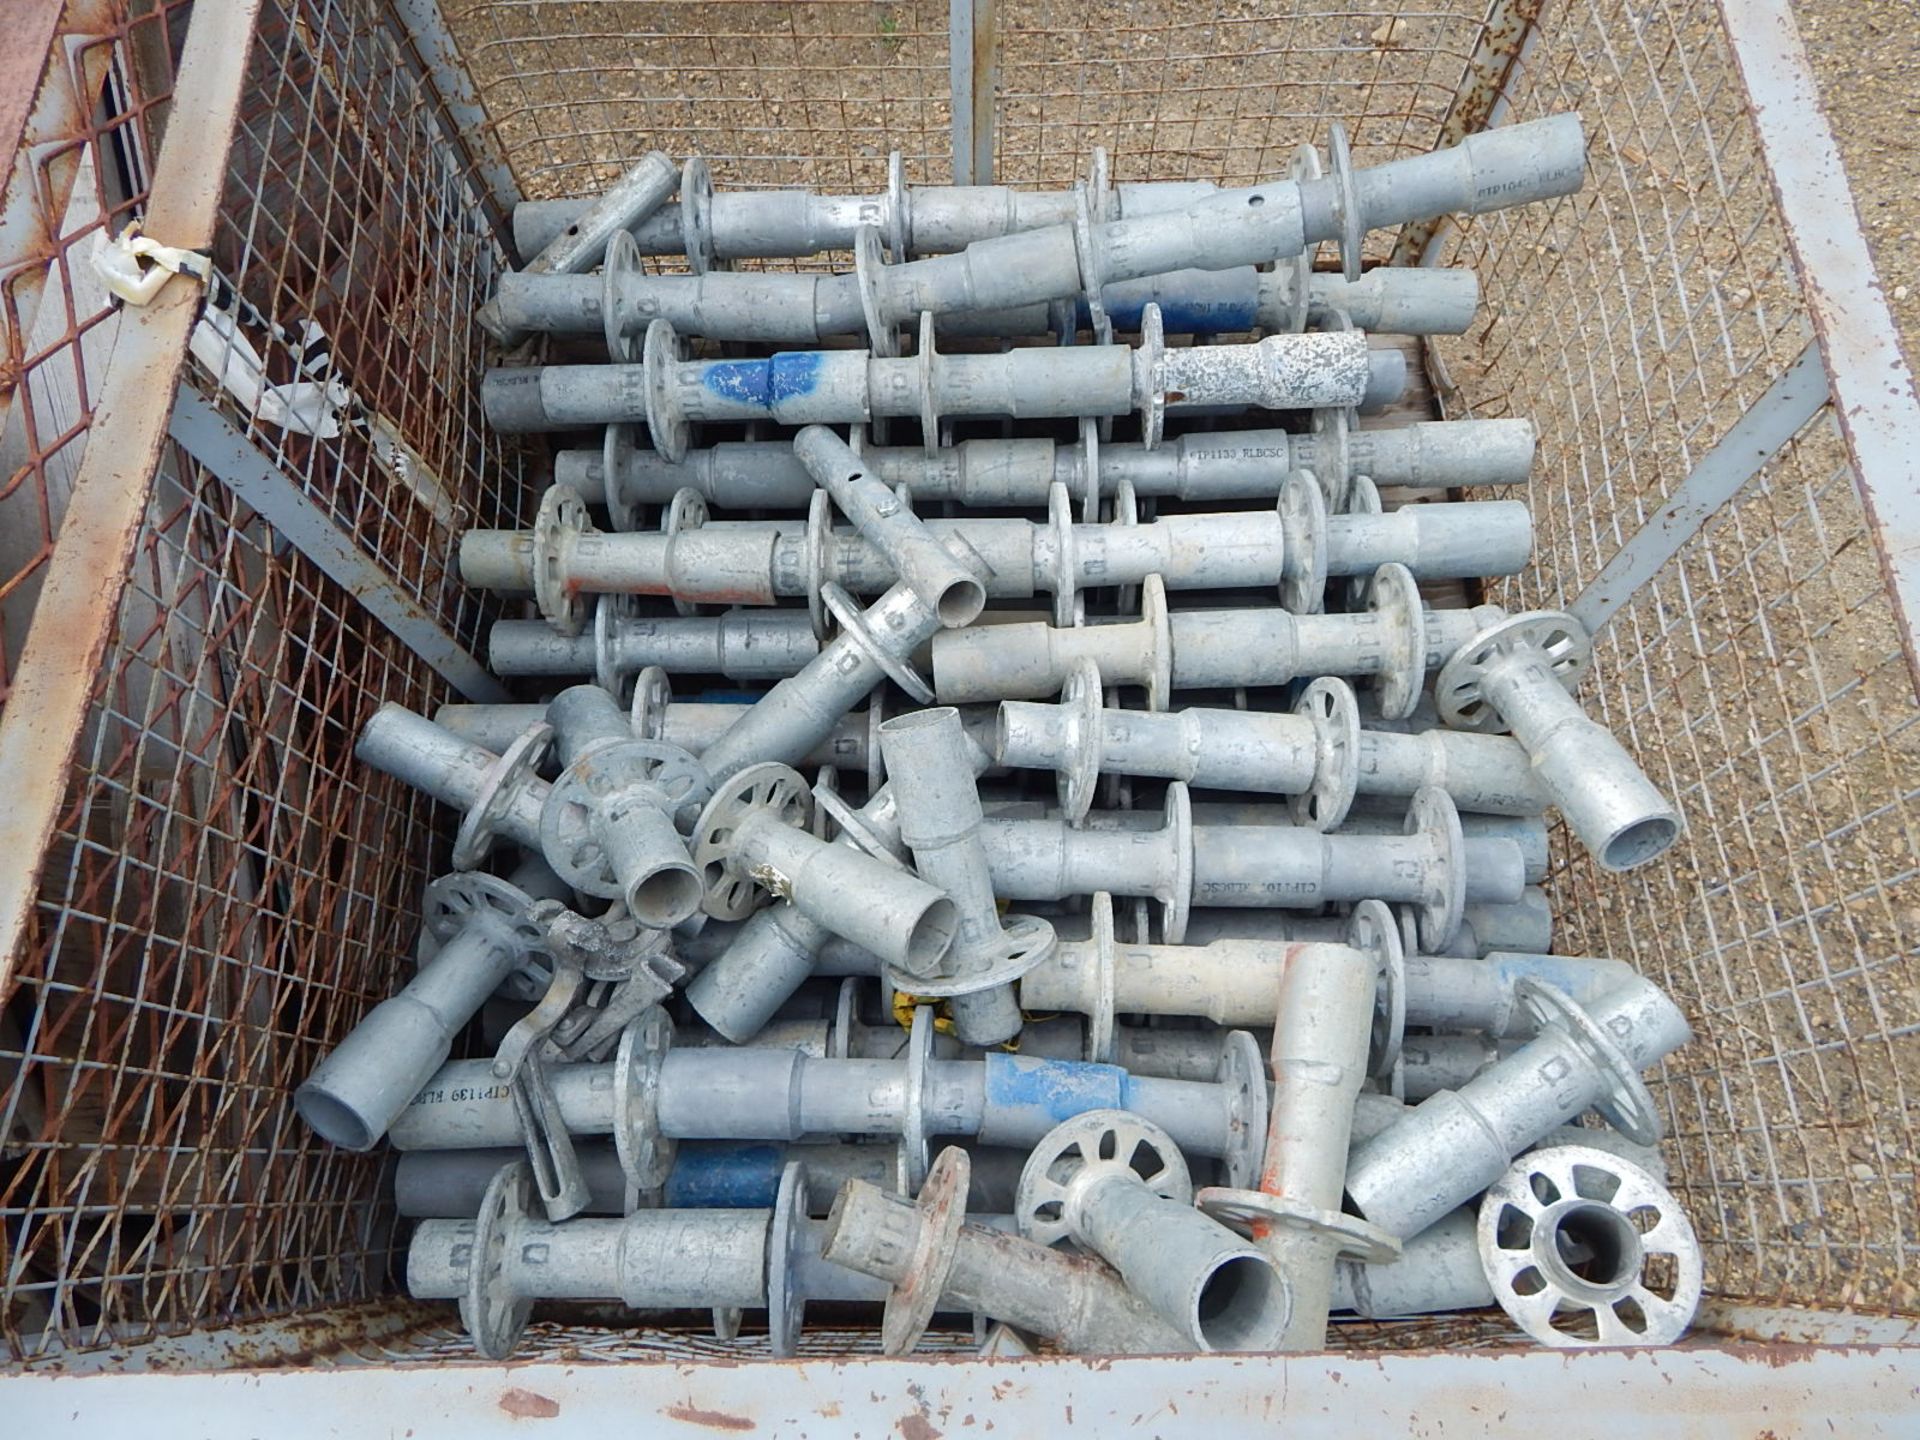 LOT/ SCAFFOLDING COMPONENTS CONSISTING OF STARTER BRACKETS, BASE COLLARS, SCREW JACKS AND END TO END - Image 7 of 8